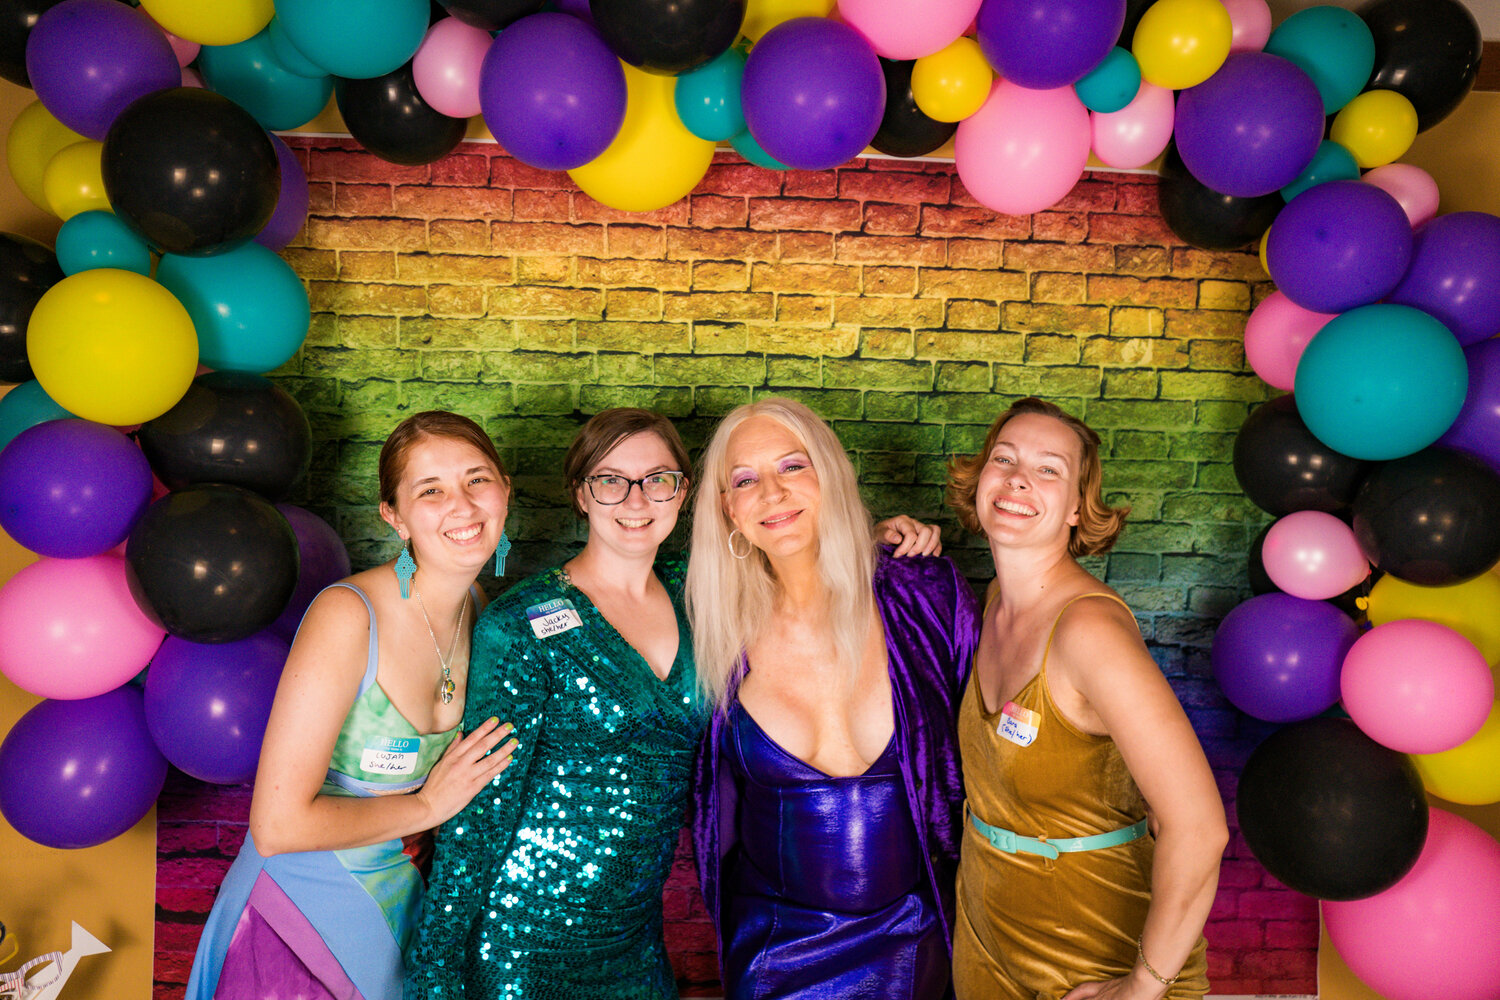 Lewis County Dignity Guild board members, from left, Luján Rodríguez, Jacky Sjoblom, Sandy Beach and Sara Smiley pose for a photo at the Mineral School Queer Prom on Saturday, Sept. 9.